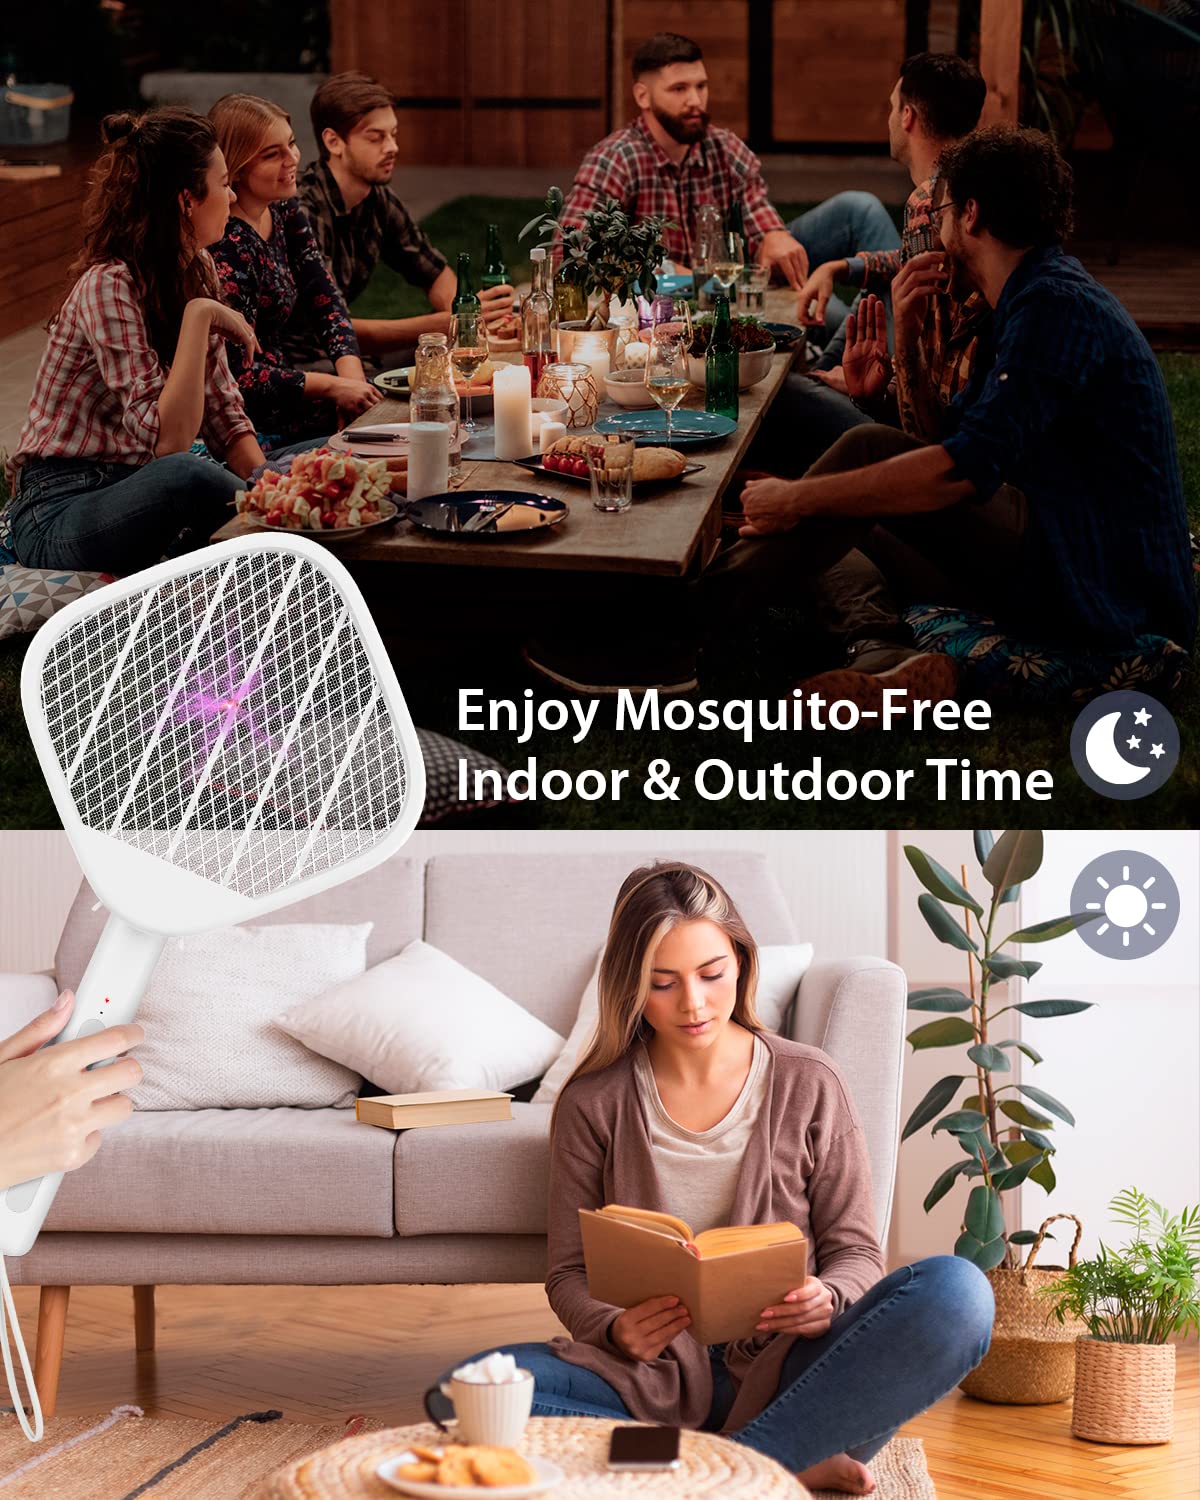 Electric Fly Swatter Foldable, Powerful 4000V Bug Zapper Racket, Mosquito Killer w/Purple Light, Rechargeable 1200mAh Insect Killer, 3-Layer Safe Design, Hanging Standing Portable for Indoor Outdoor